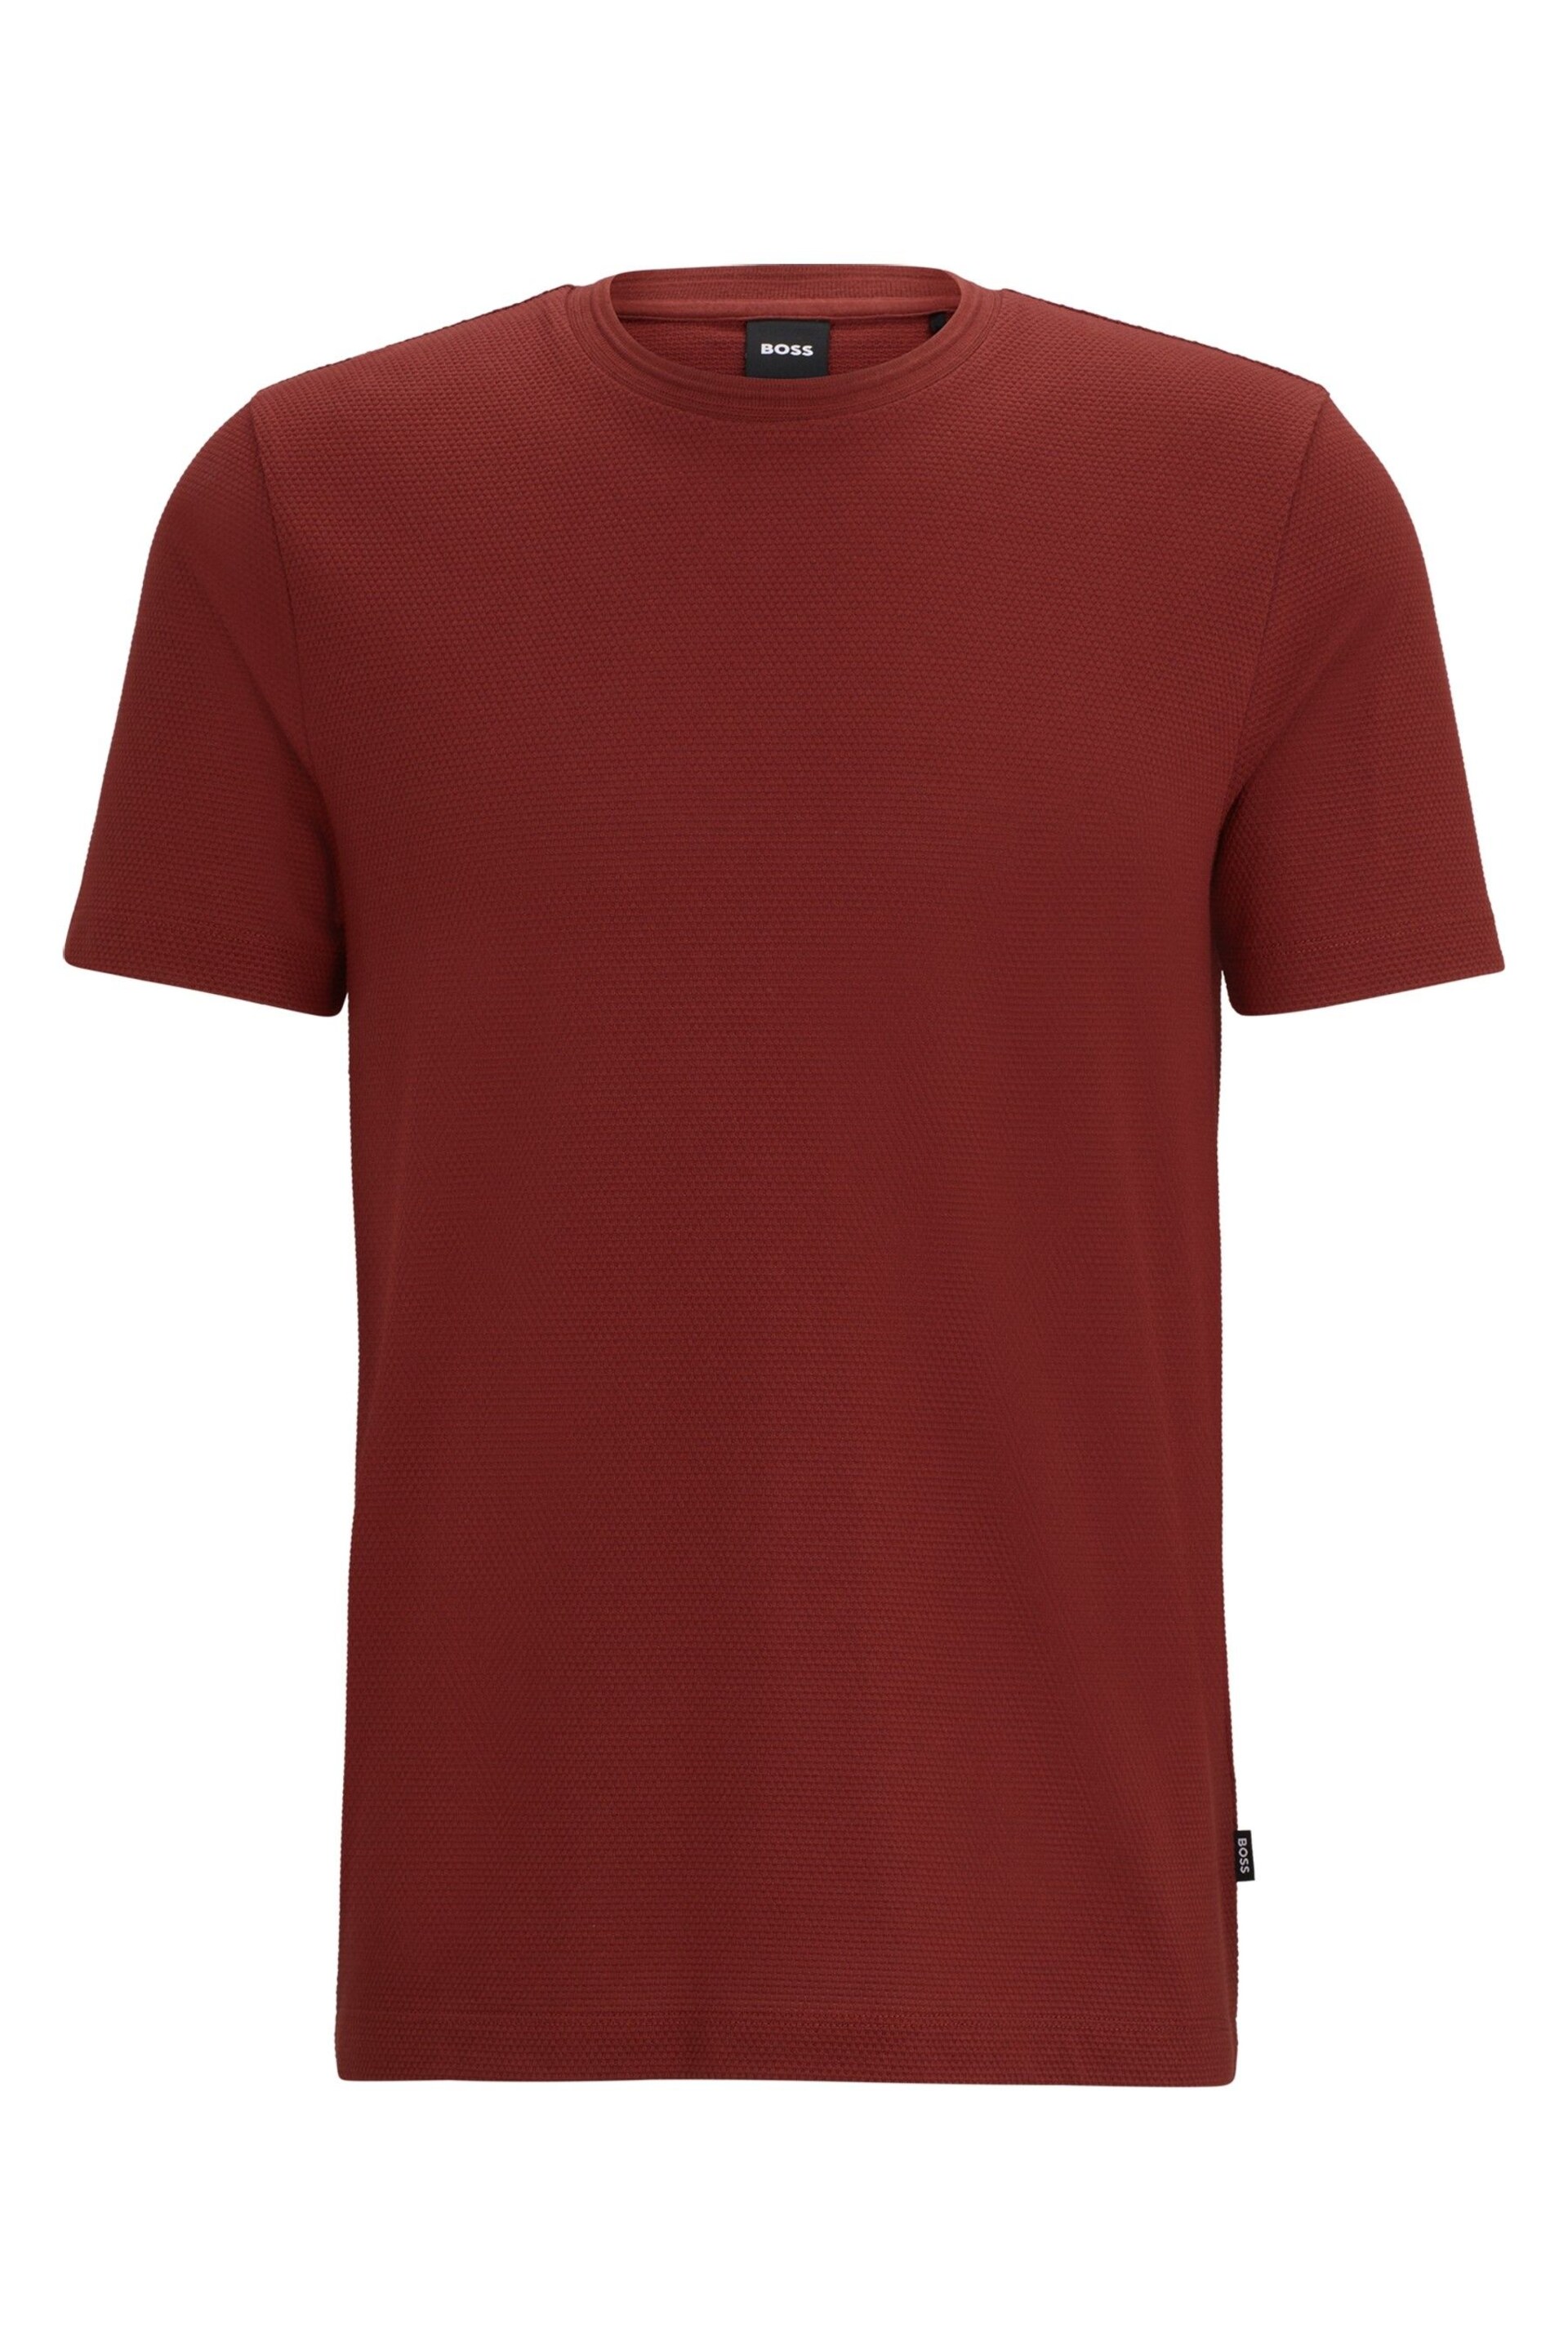 BOSS Red Cotton-Blend T-Shirt With Bubble-Jacquard Structure - Image 5 of 5